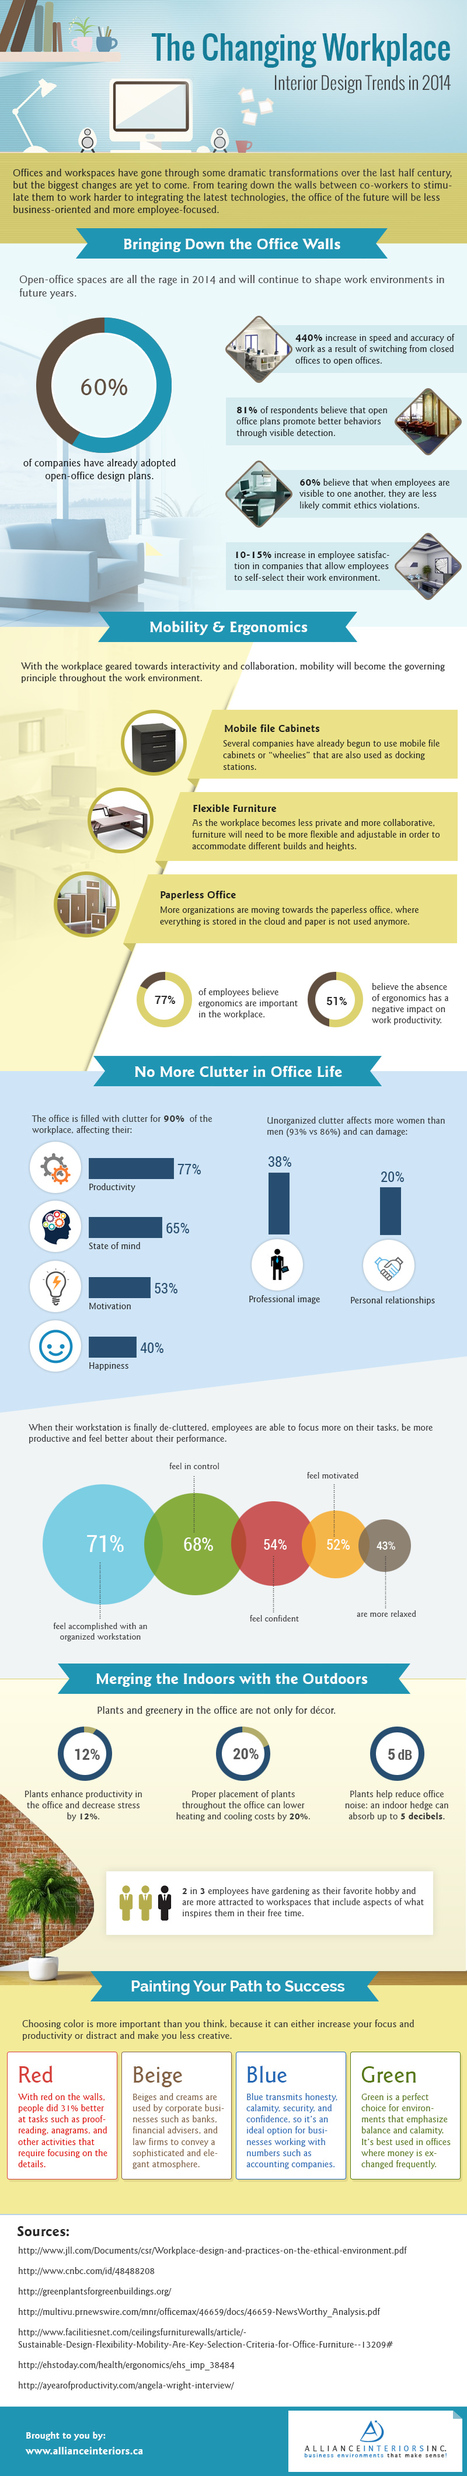 Shaping The Office Of The Future: Workspace Design Trends [Infographic] | Design, Science and Technology | Scoop.it